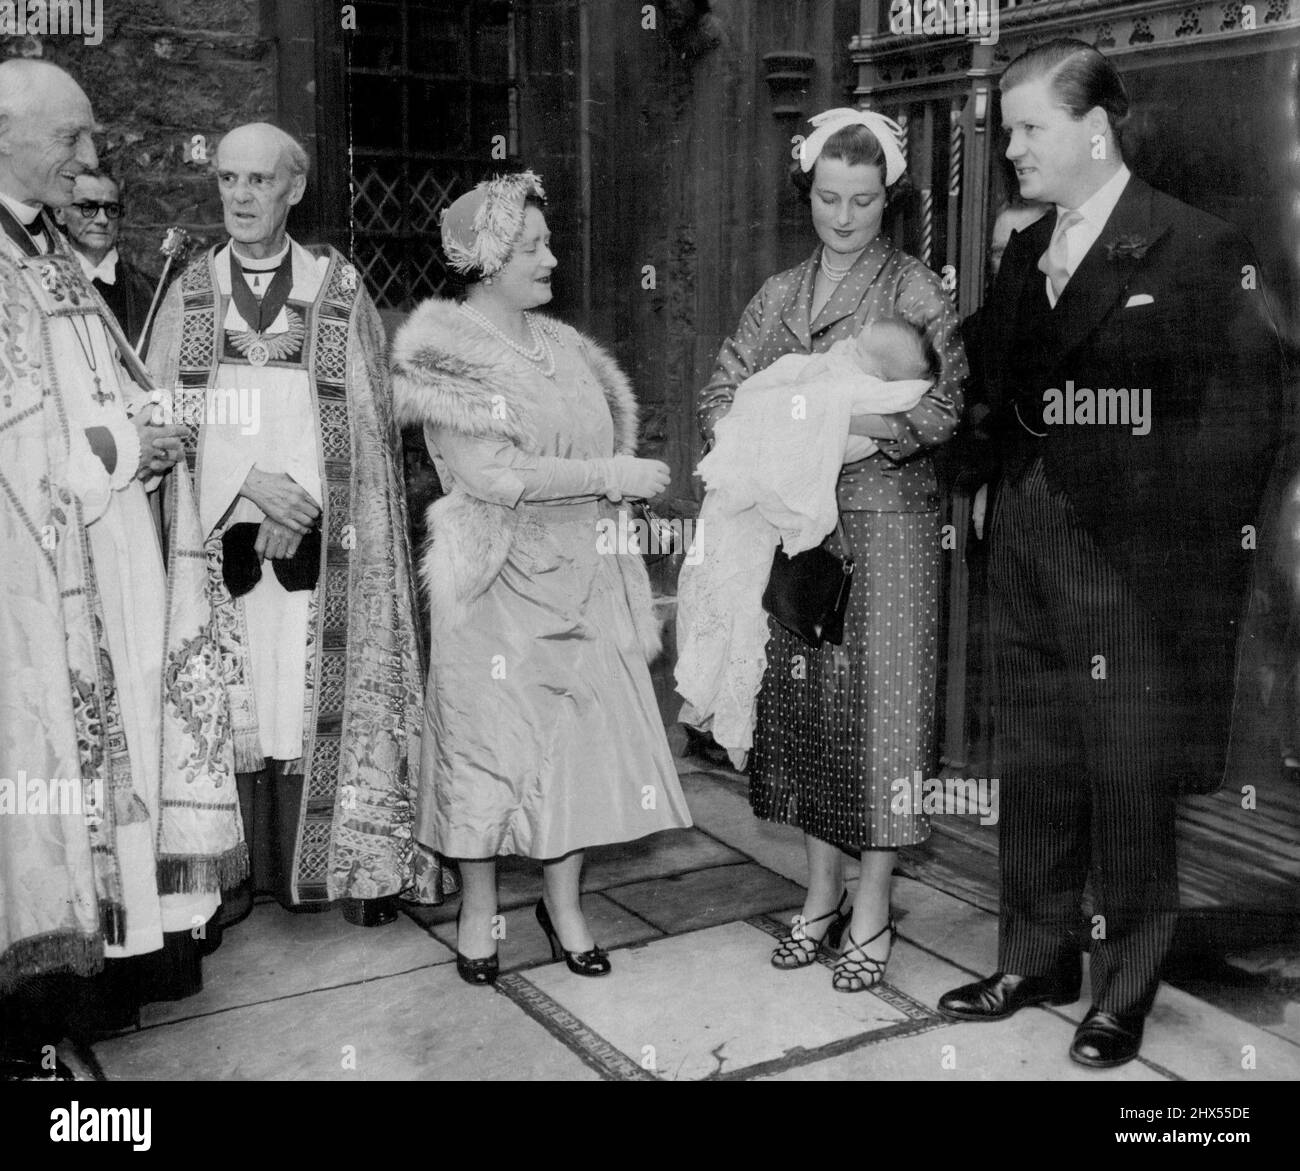 Queen Mother Admires Her New God daughter -- Oh, what a lovely baby! That's what Queen Elizabeth the Queen Mother seems to be saying us the 19-year-old mother, Viscountess Althorp, shows Sarah Lavinia Spencer to the baby's Royal godmother at Westminster Abbey where the christening took place in St. Faith's Chapel to-day (Thursday) the baby was born in a Northampton nursing home on March 19. Viscount Althorp is seen on right. Left of the Queen Mother are the Rt. Rev. Percy Mark Herbert, Bishop of Norwich, and the Very Rev. A.C. Don, Dean of Westminster (Second from left). June 09, 1955. Stock Photo